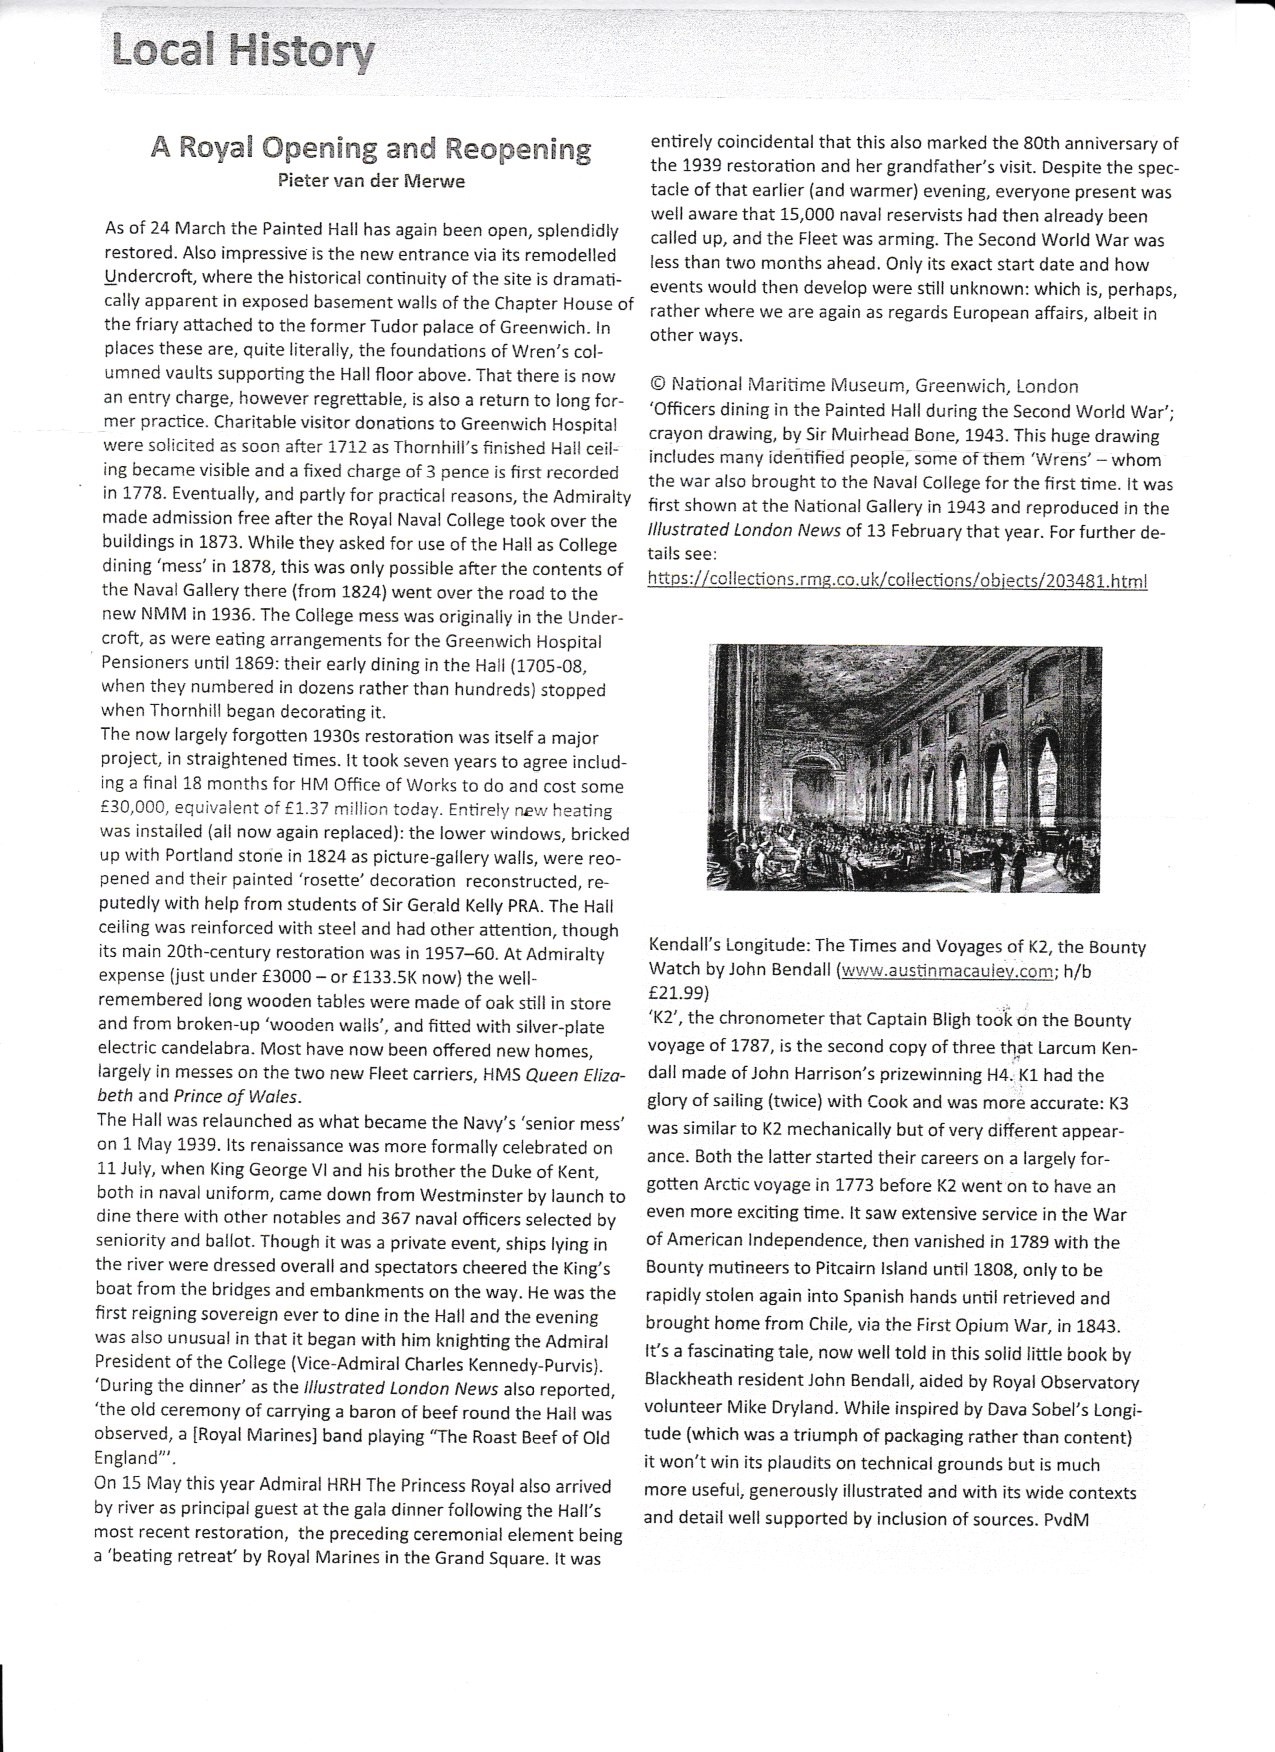 Greenwich Society Reviewed the Book Kendall's Longitude by John Bendall